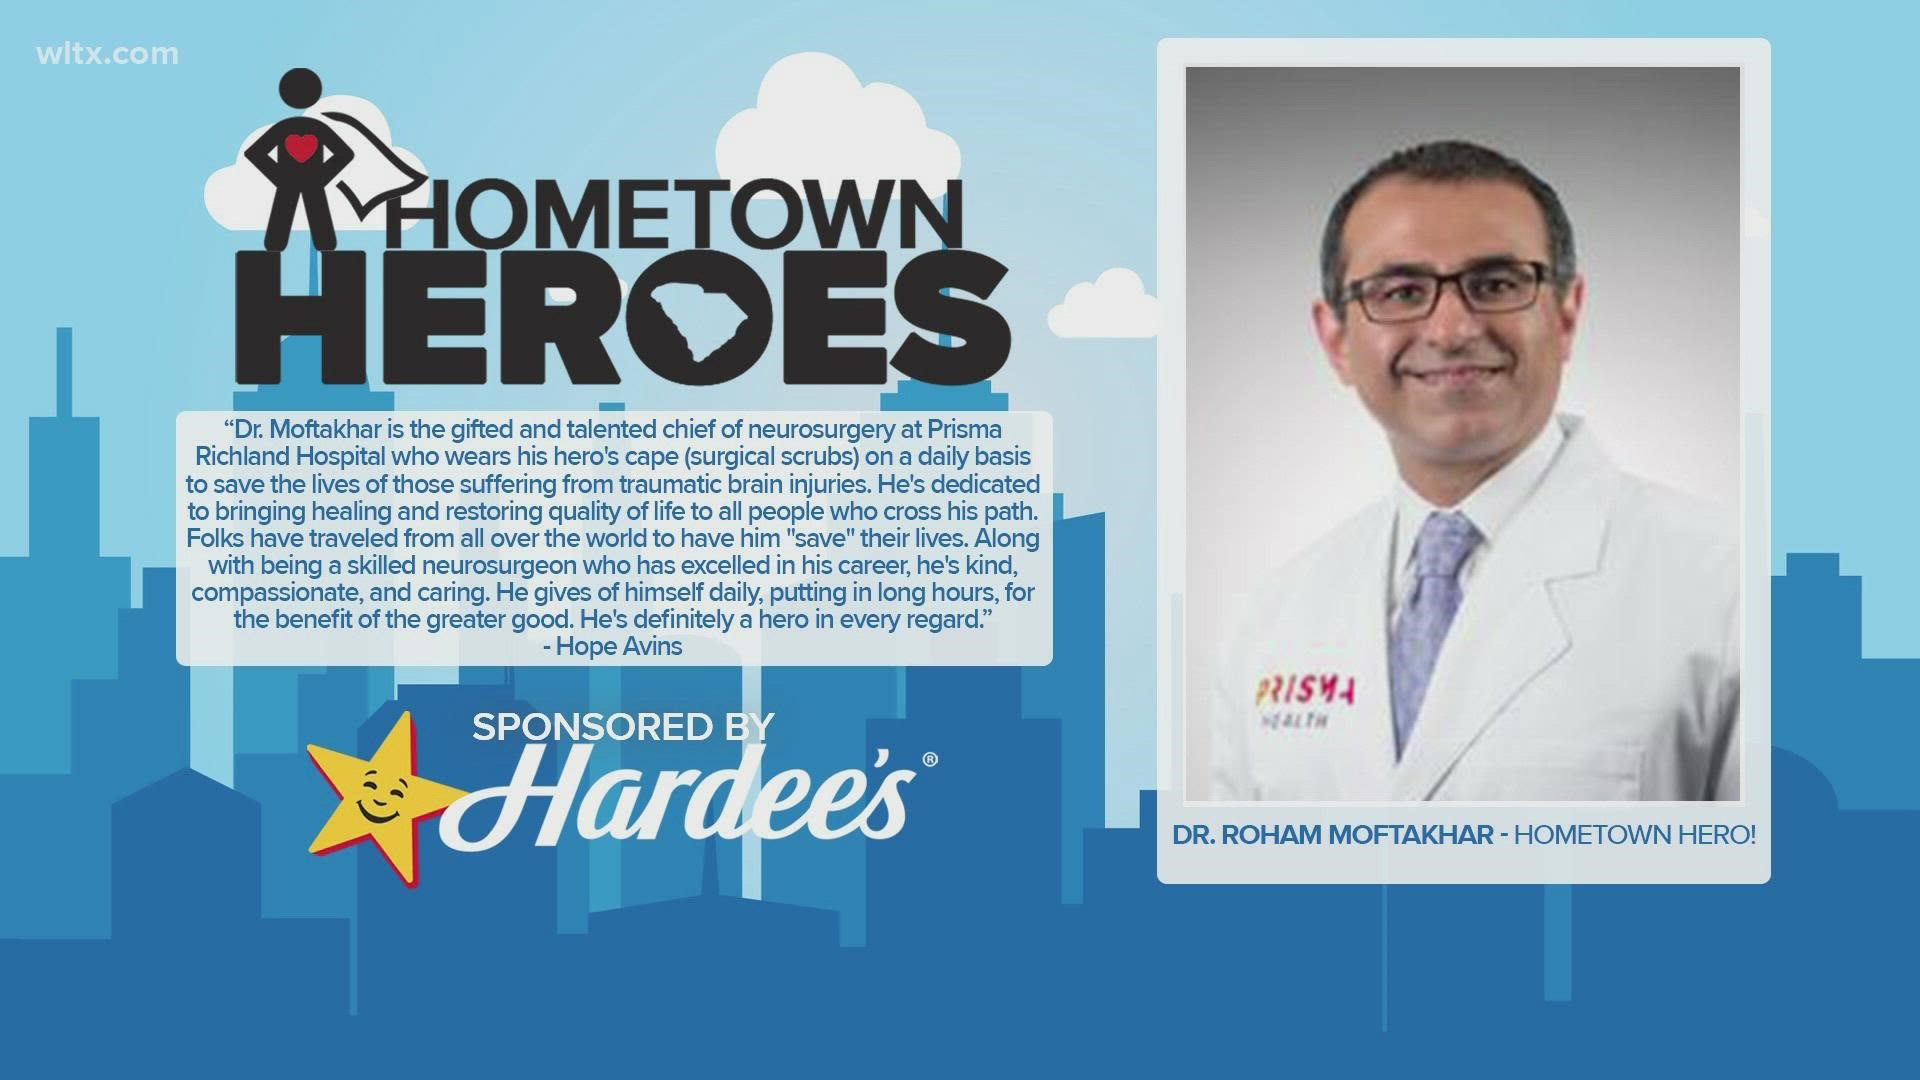 Dr. Roham Moftakar is the chief of neurosurgery at Prisma Richland Hospital. Not only is he a talented neurosurgen, he's also kind, compassionate, and caring.